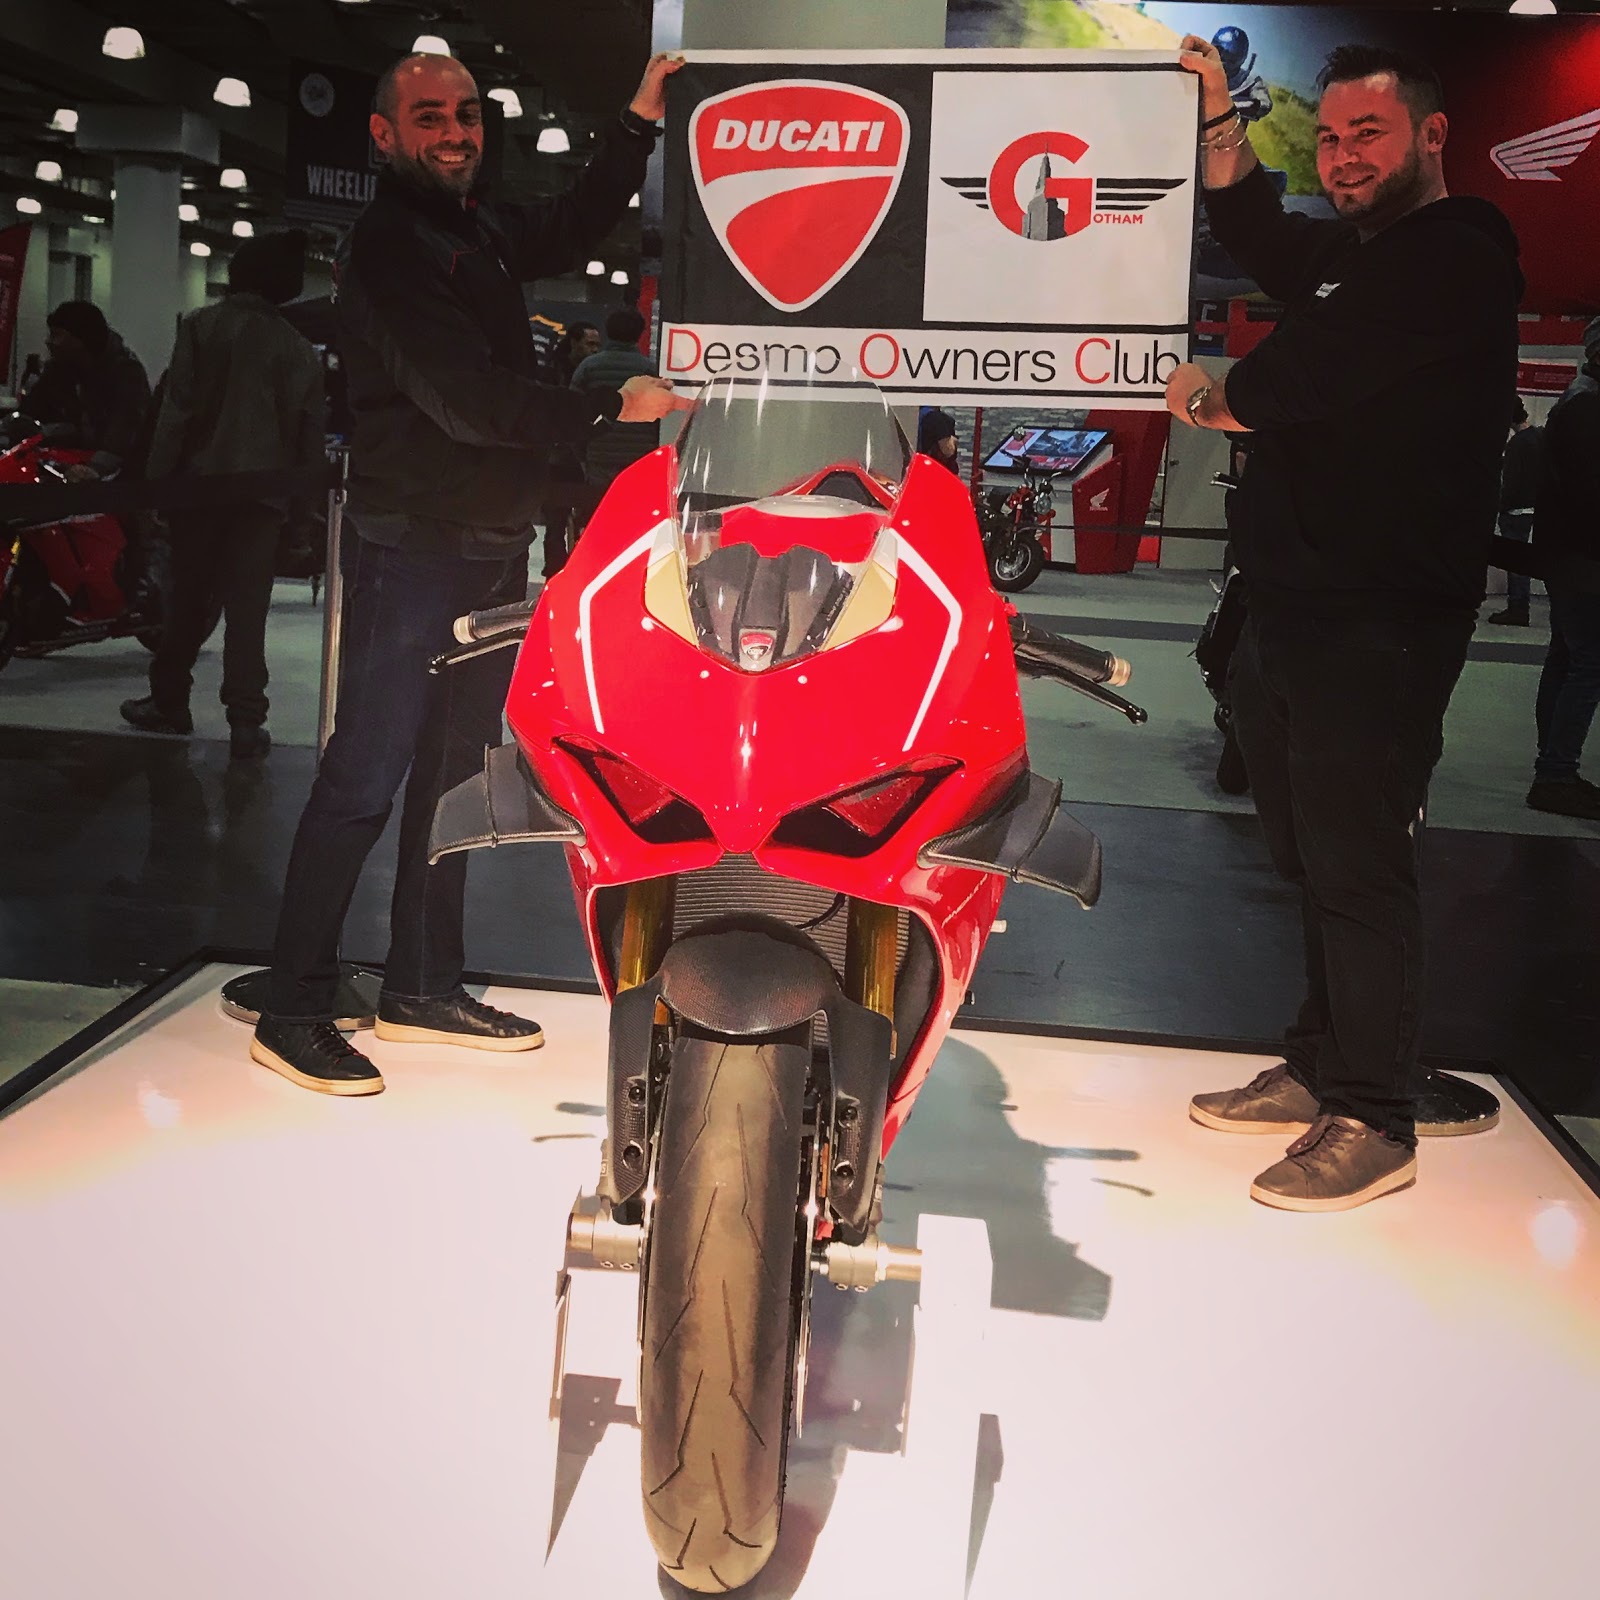 Tommy Napolitano and Tigh Loughhead of Gotham Ducati with Ducati New York at the 2019 International Motorcycle Show